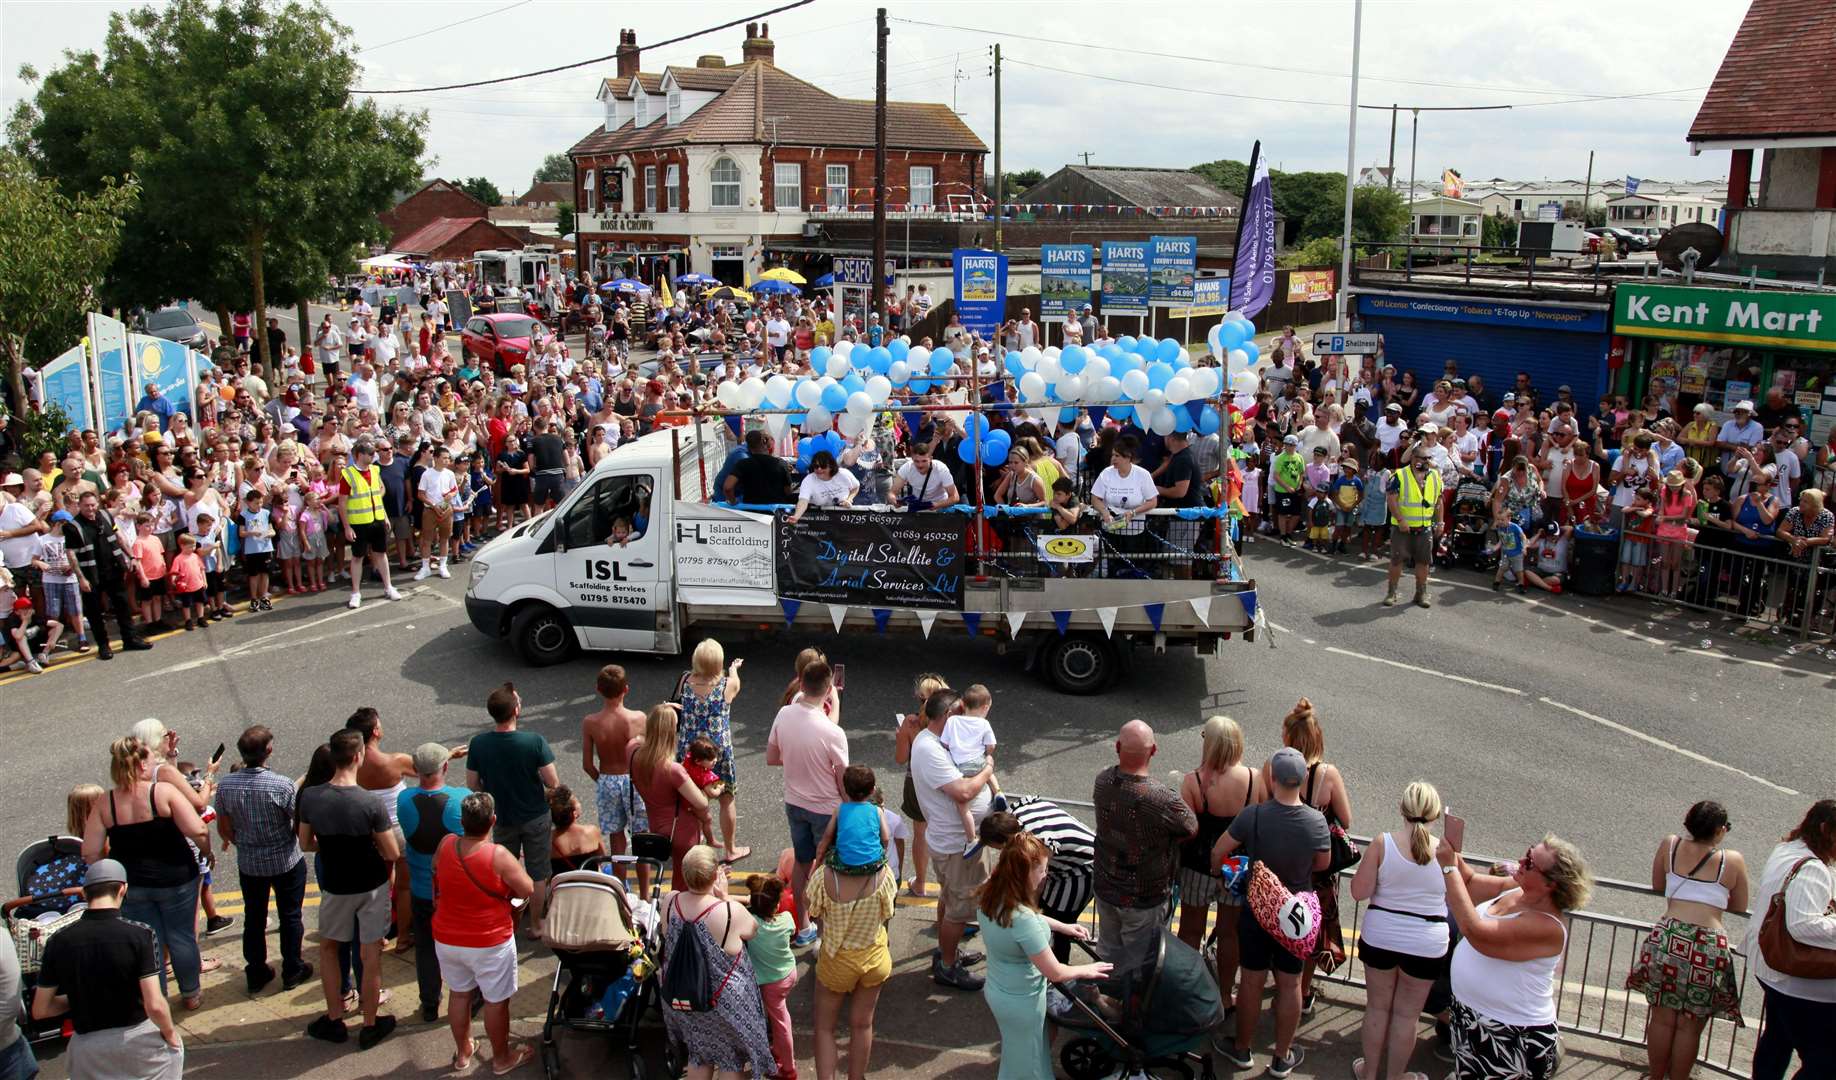 Spectators lining the streets for Leysdown's annual parade in 2019. Picture: Sean Aidan